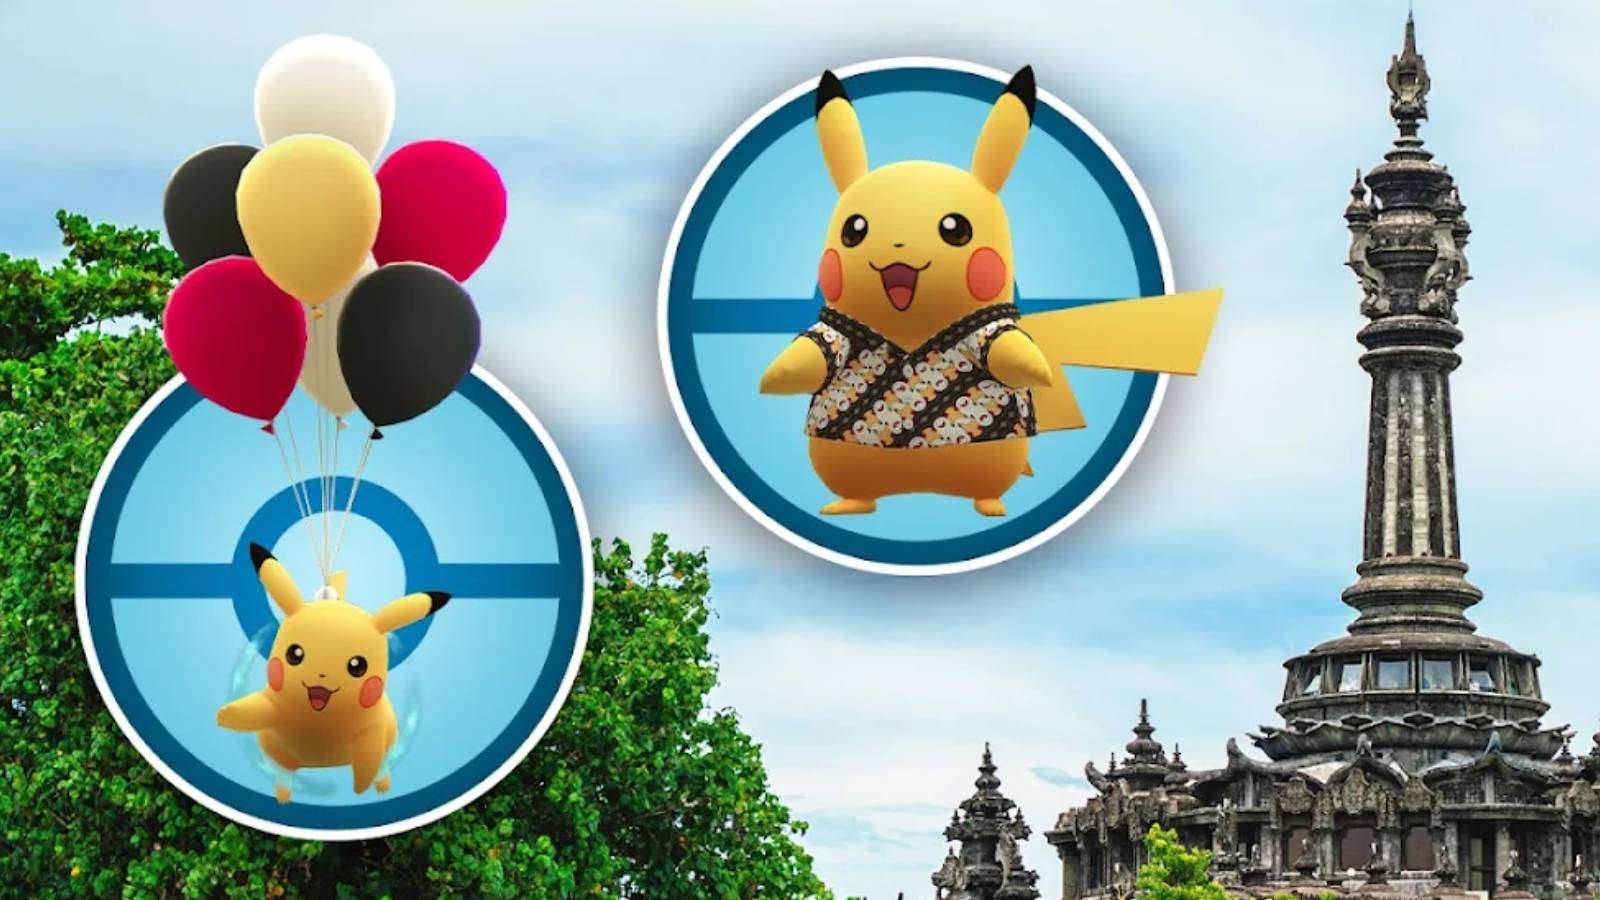 Key art shows Pikachu wearing a batik shirt, a Pikachu floating with balloons, and in for background is a picture of a landmark in Indonesia